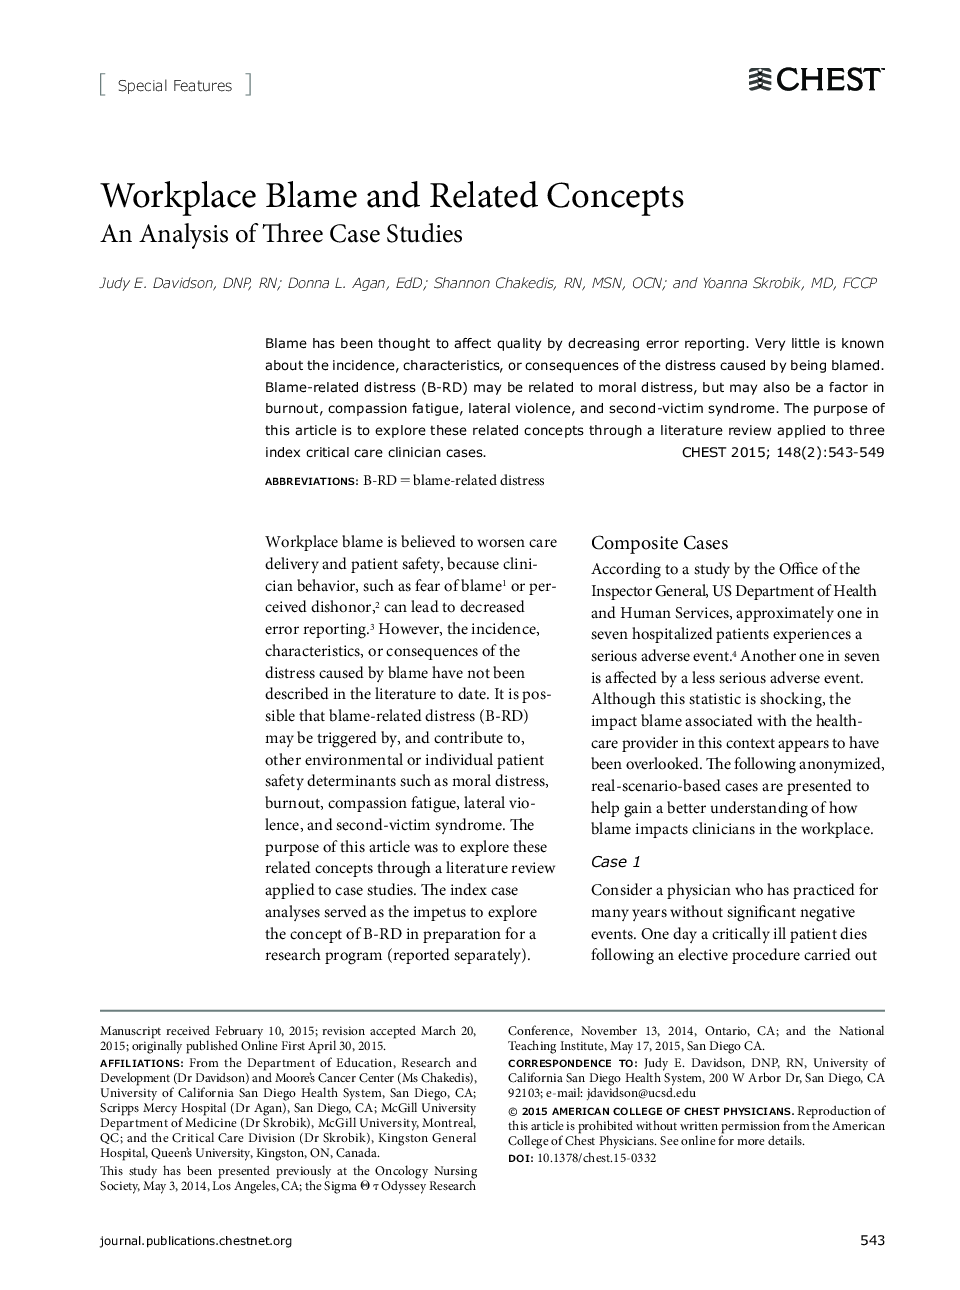 Workplace Blame and Related Concepts